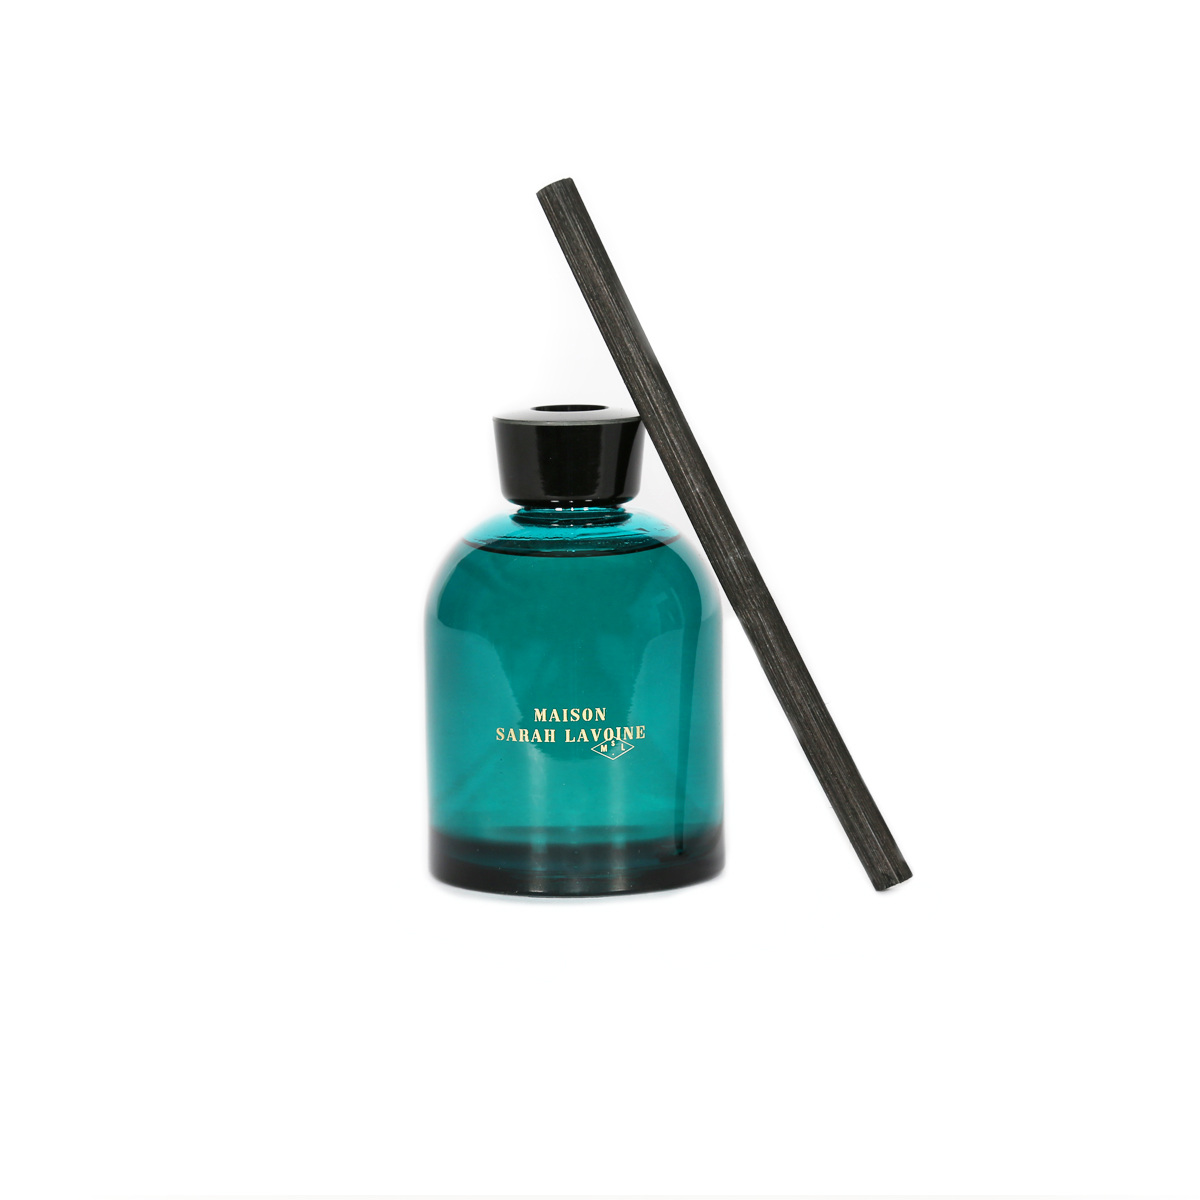 Perfume Diffuser Victoires, Scent - Glass / Wooden stem - image 1